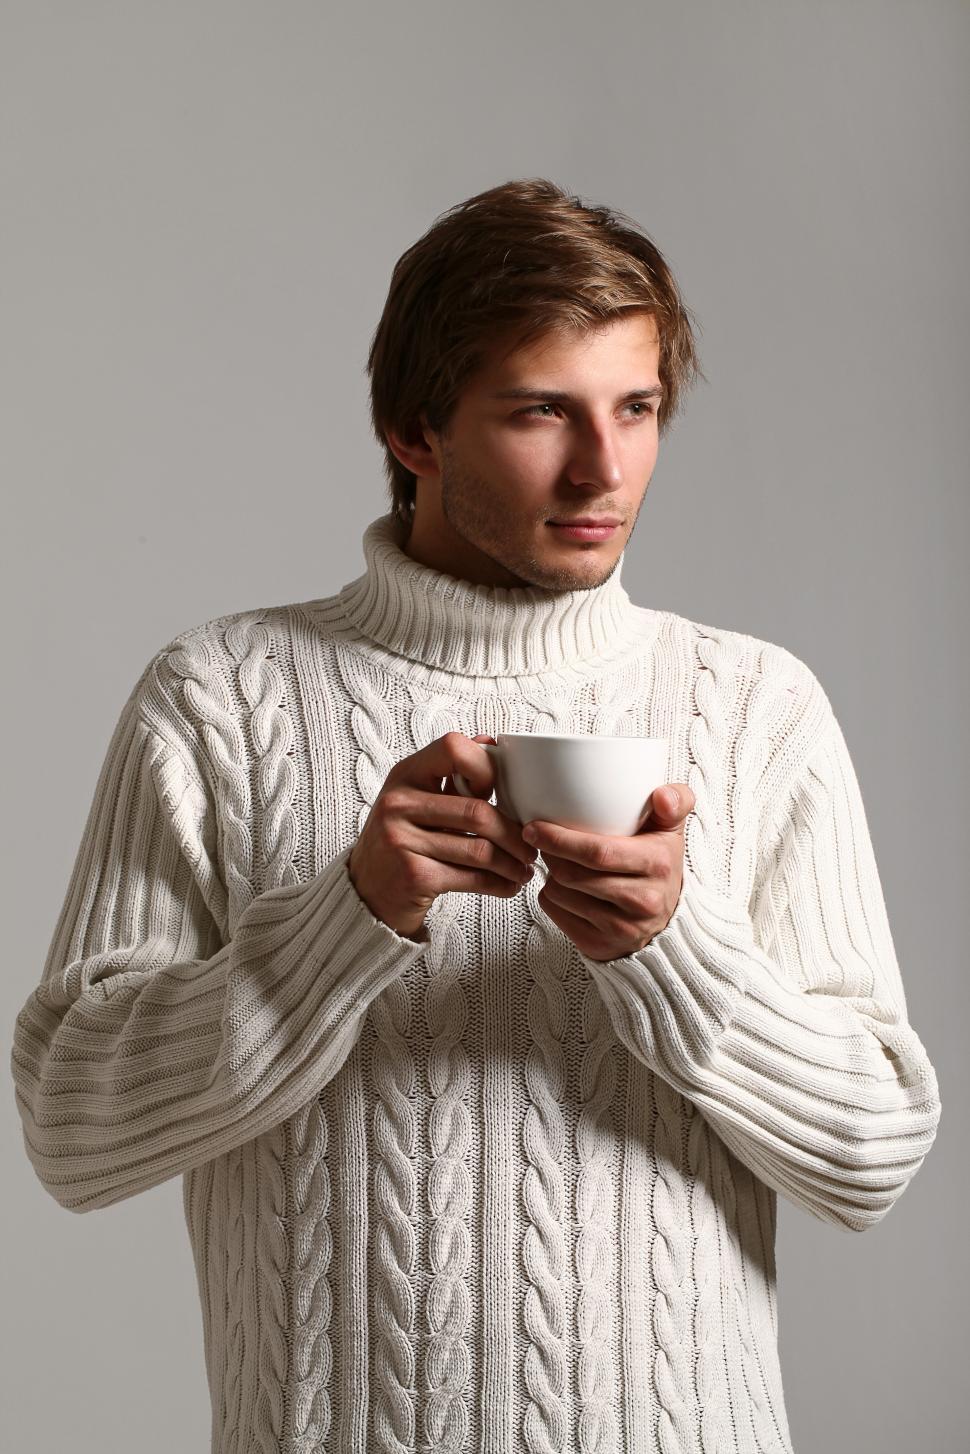 Free Image of Man with hot drink and big sweater 